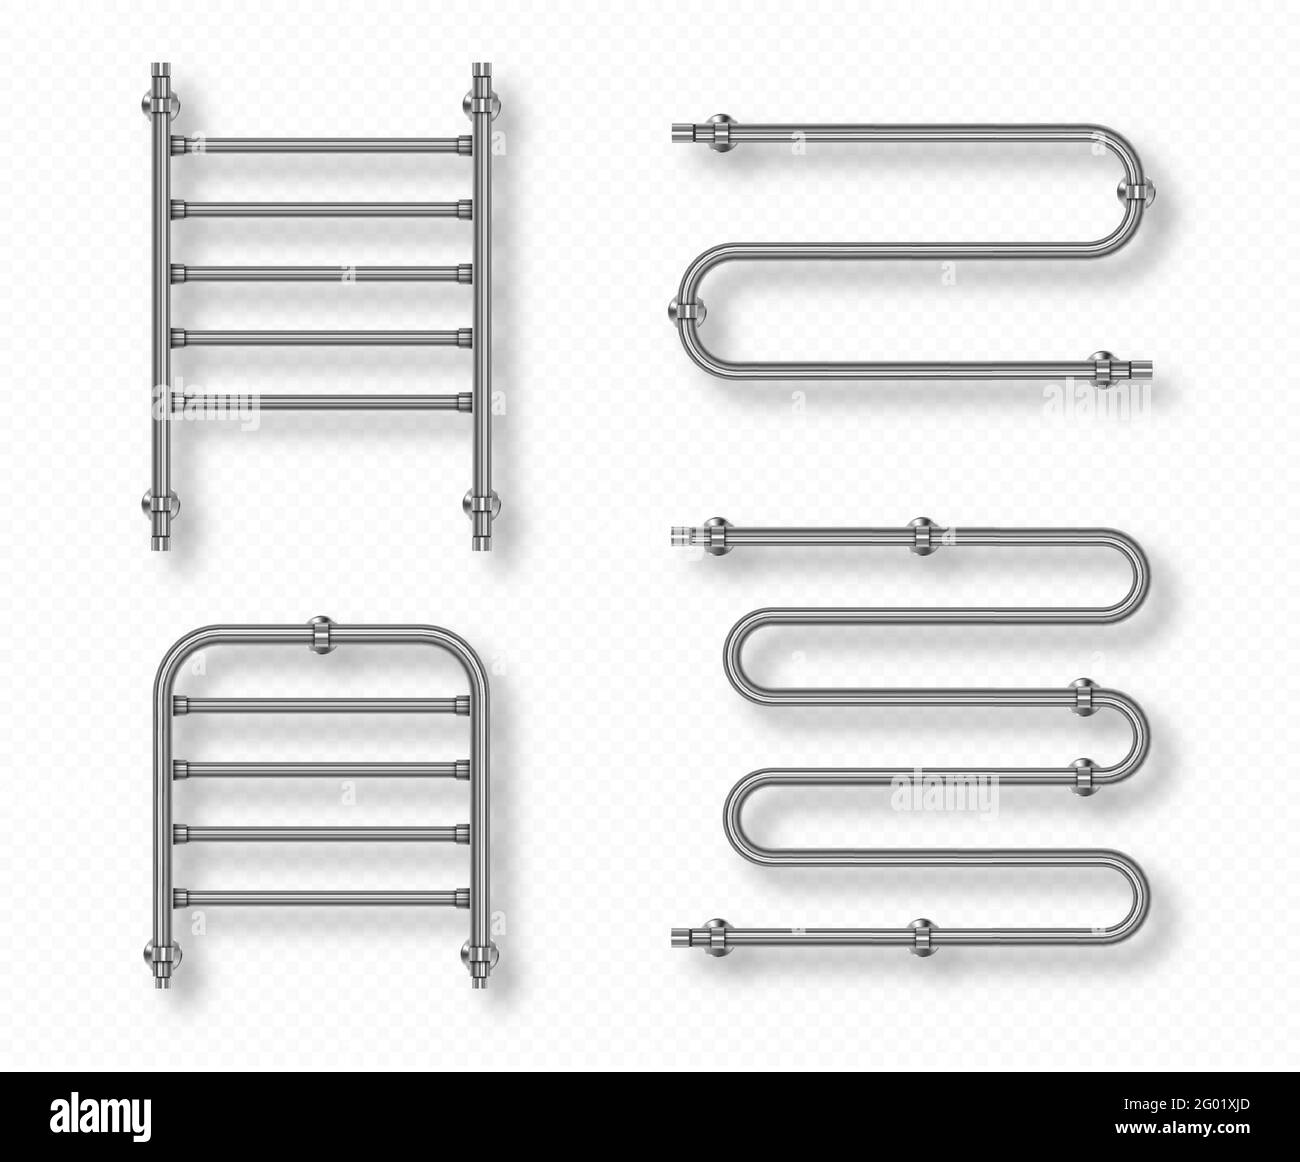 Towel rails for home bathroom and toilet room. Dryer with steel pipes, chrome radiators isolated on transparent background. Vector realistic set of 3d metal towel heaters hanging on wall Stock Vector